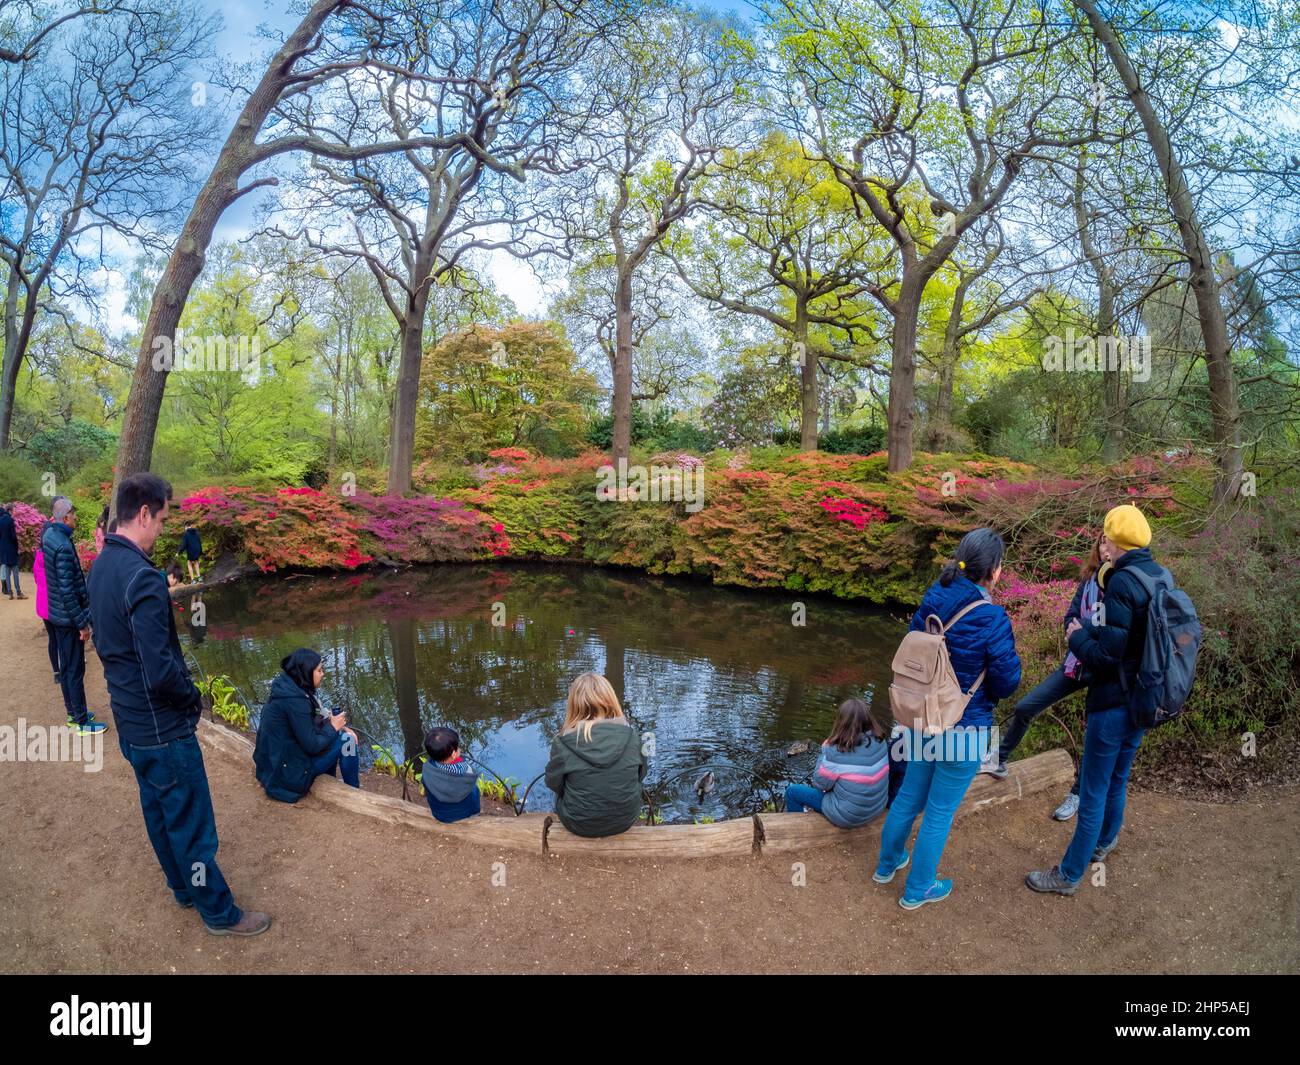 London, England, UK - May 1, 2021: Wide view of a group of people surrounding a beautiful lake inside the famous Isabella Plantation in the springtime Stock Photo